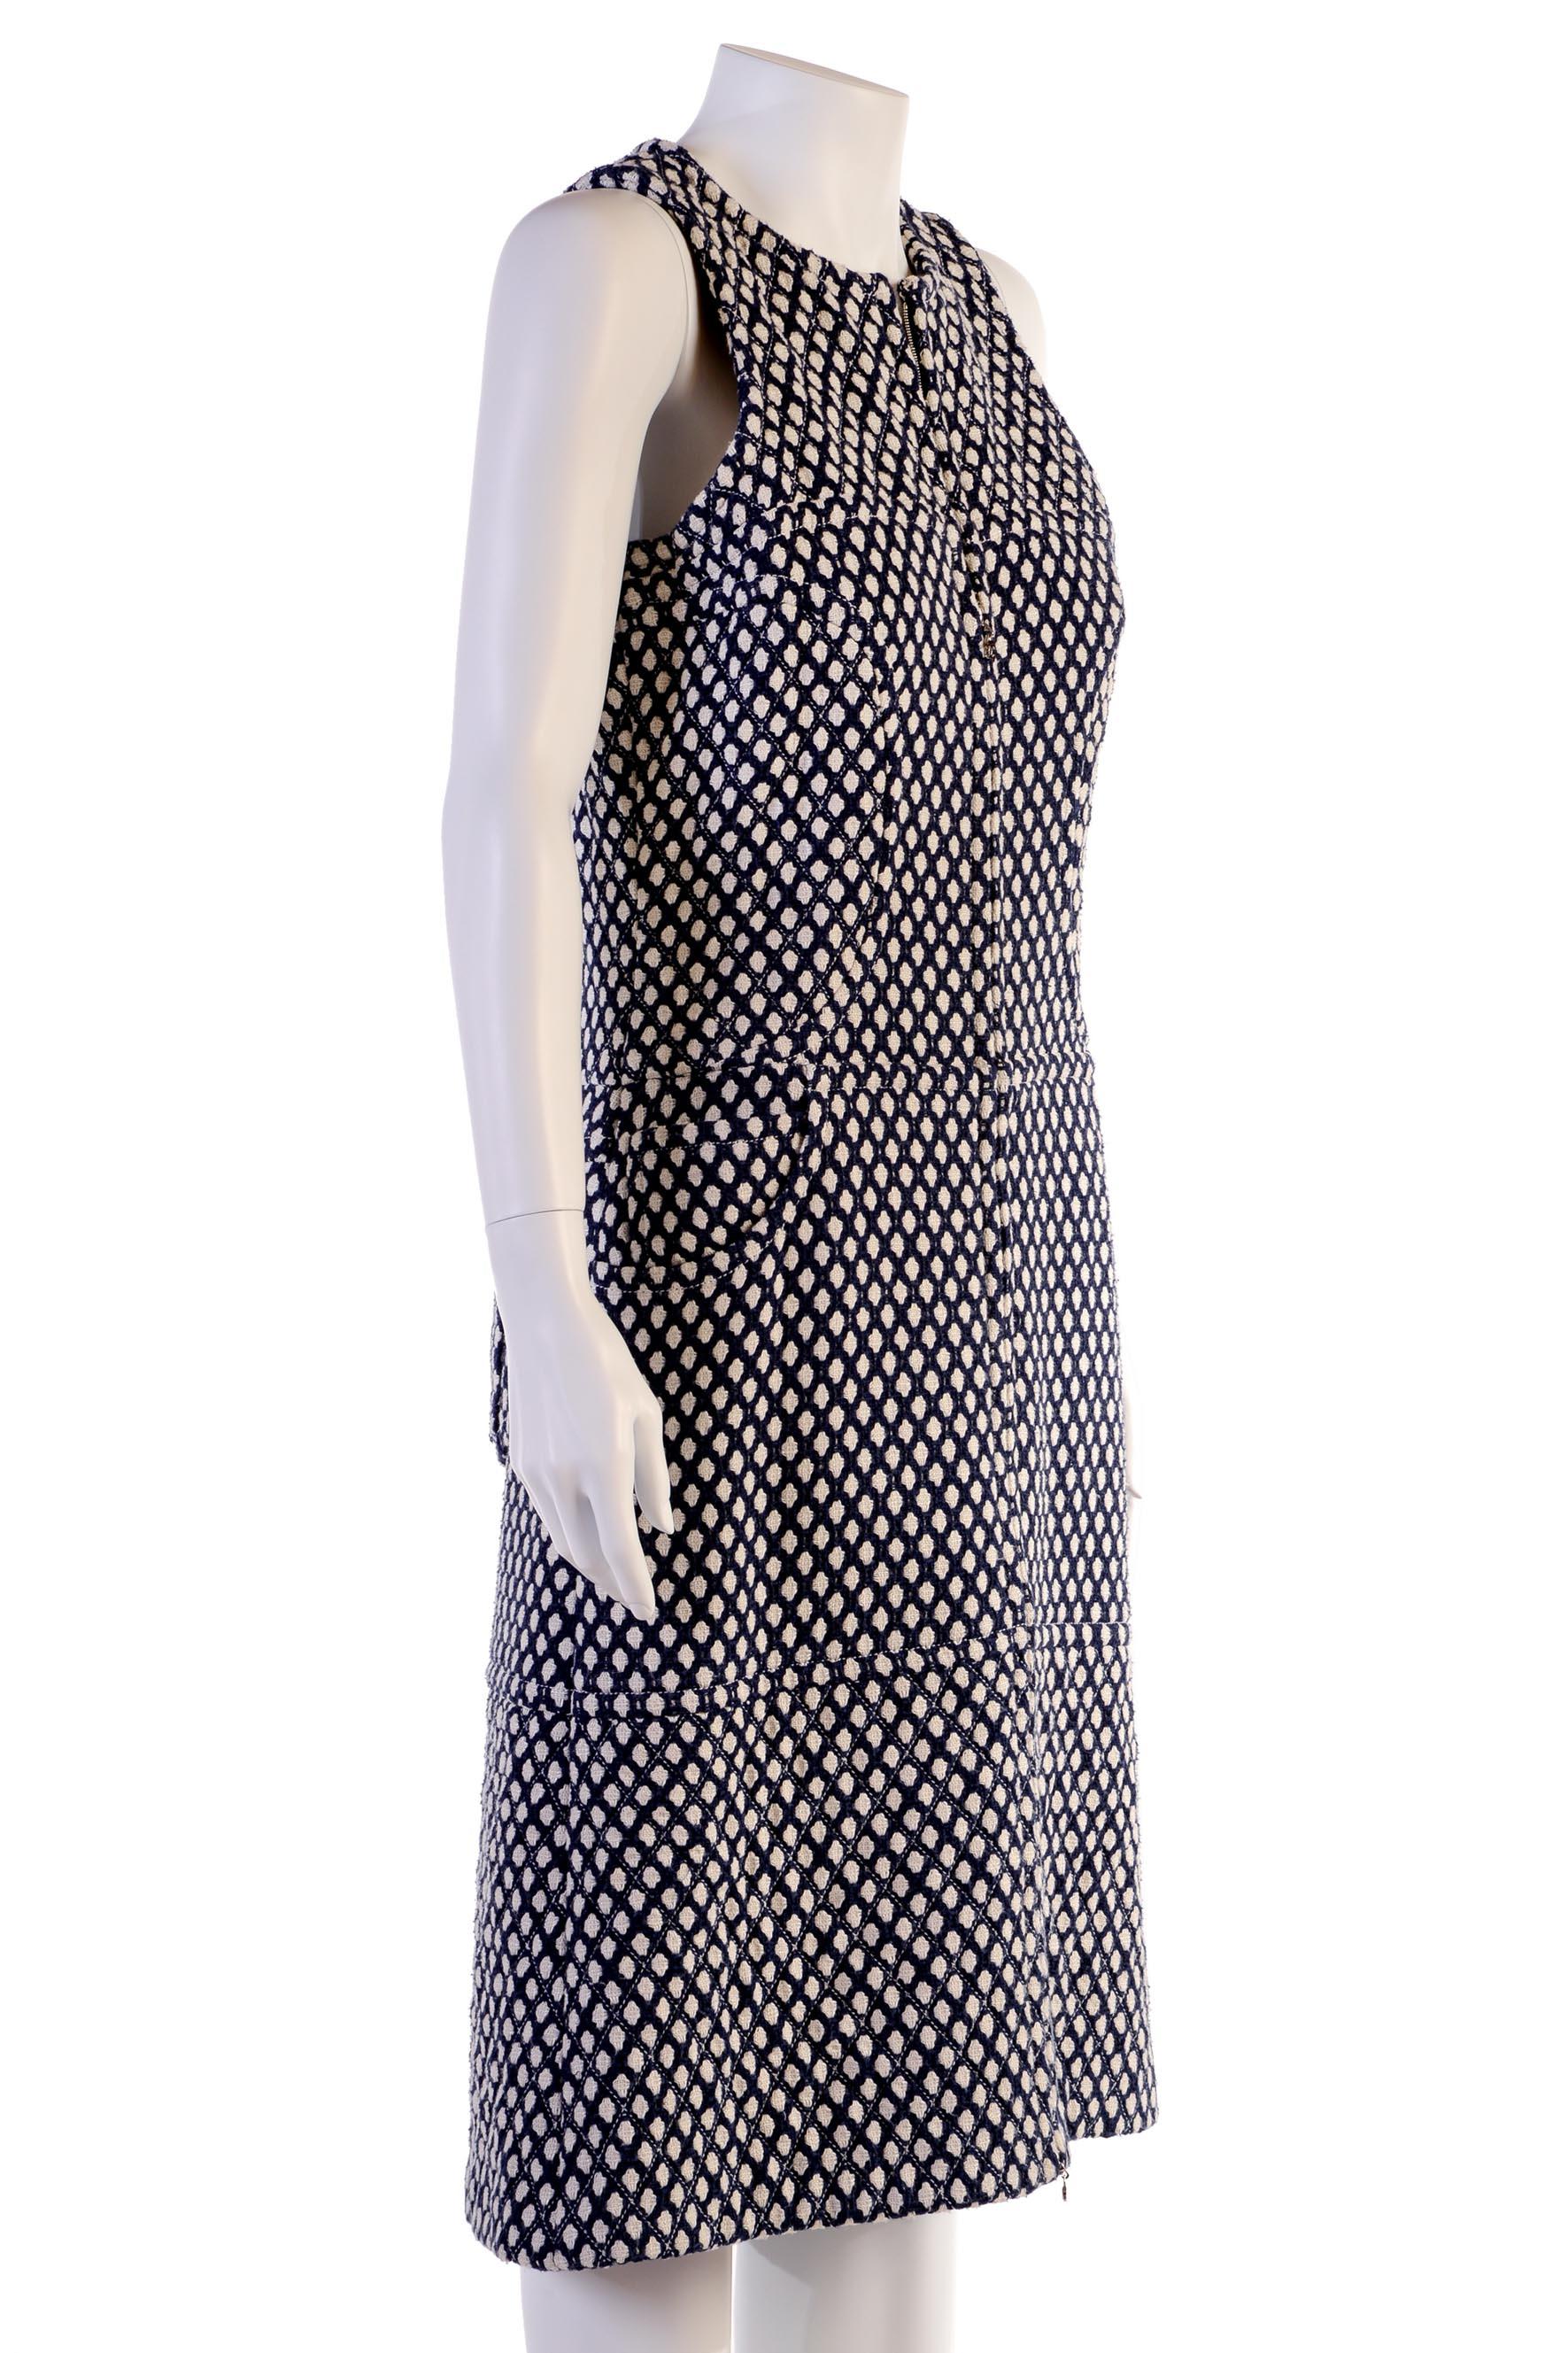 Women's CHANEL blue and white cotton dress FR 40 Spring 2008  08P For Sale